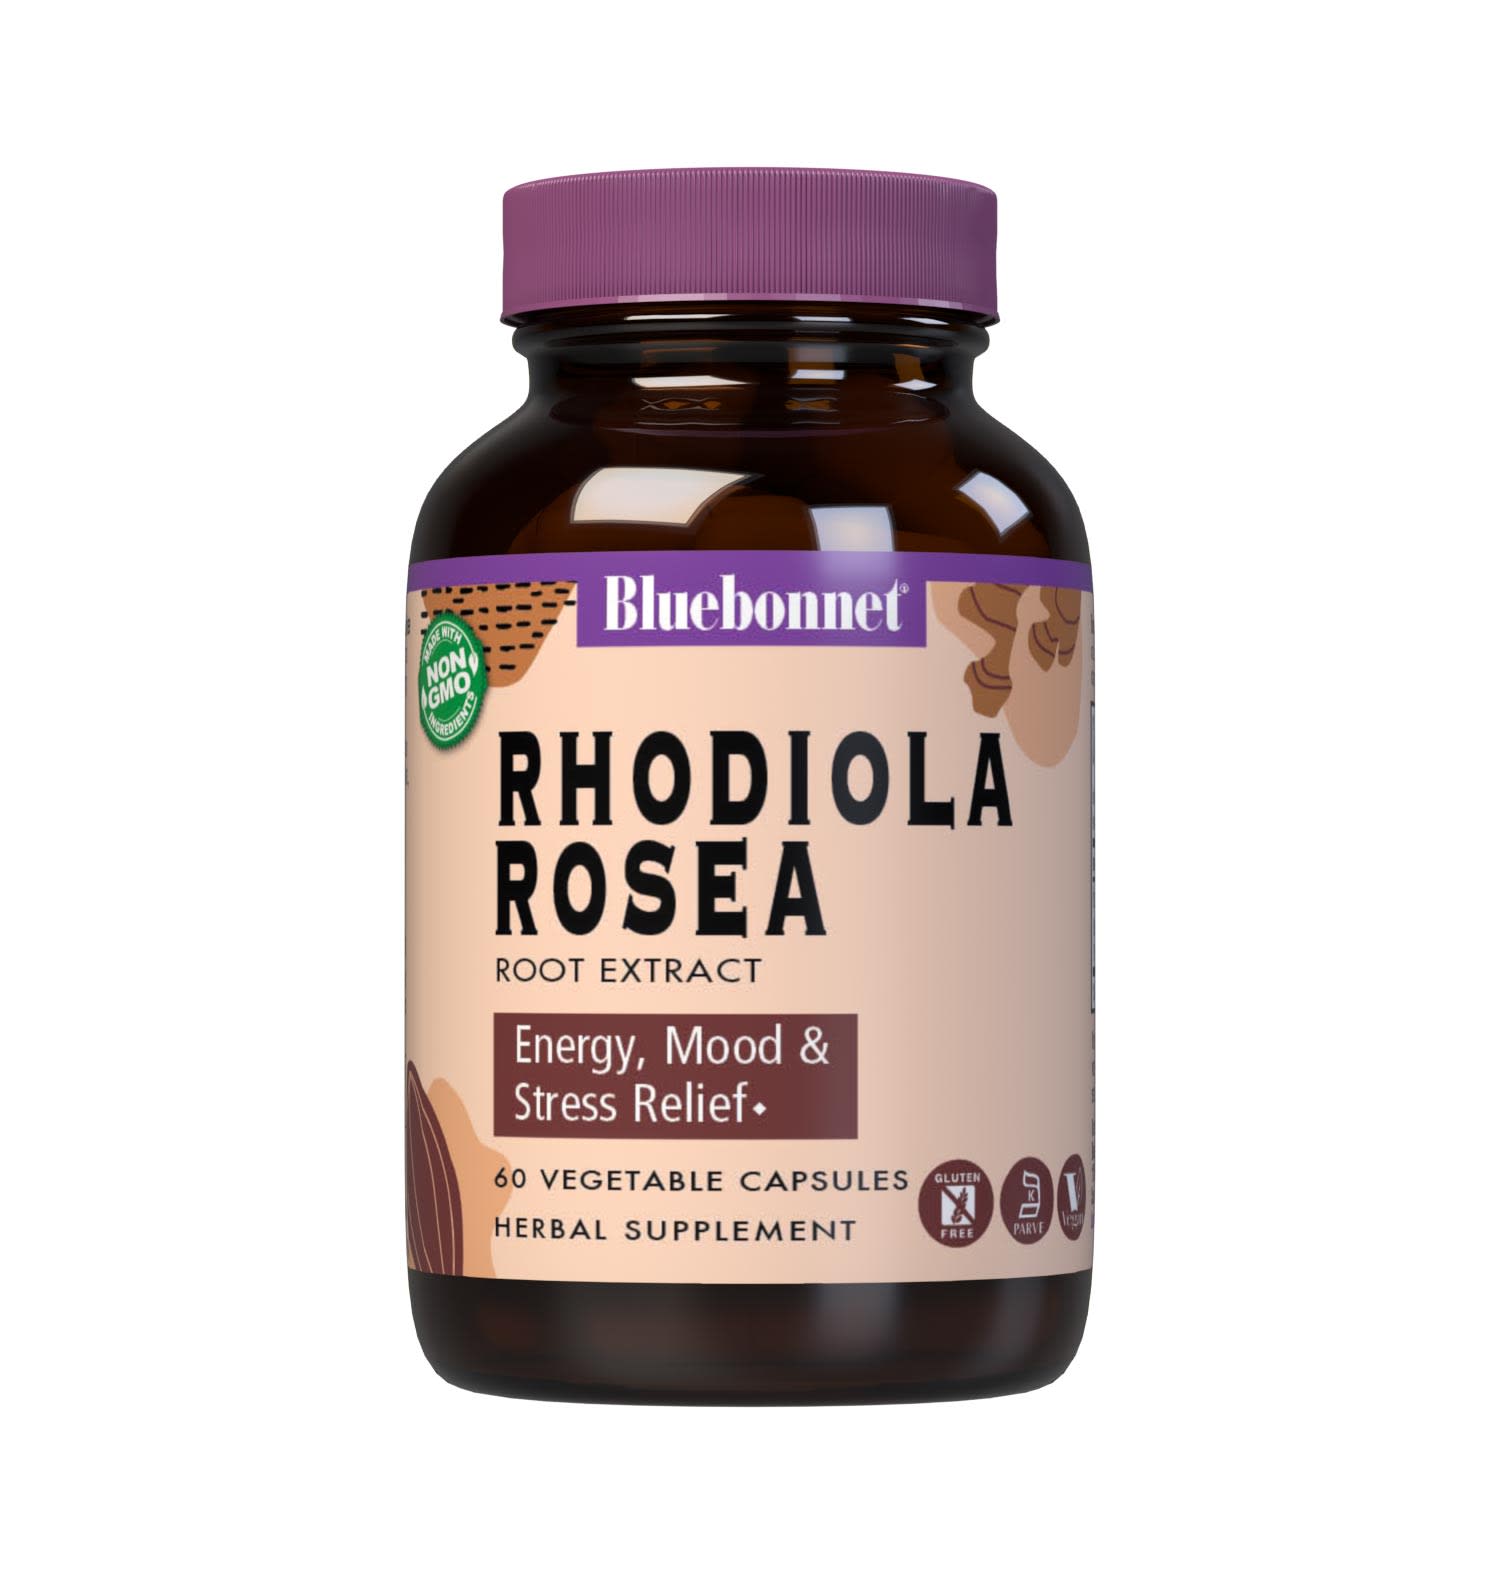 Bluebonnet’s Rhodiola Rosea Root Extract 60 Vegetable Capsules are formulated with a standardized extract of rosavins and salidrosides, the most researched active constituents found in rhodiola rosea. Rhodiola may help support emotional, physical, and mental wellbeing. A clean and gentle water-based extraction method is employed to capture and preserve rhodiola rosea’s most valuable components. #size_60 count